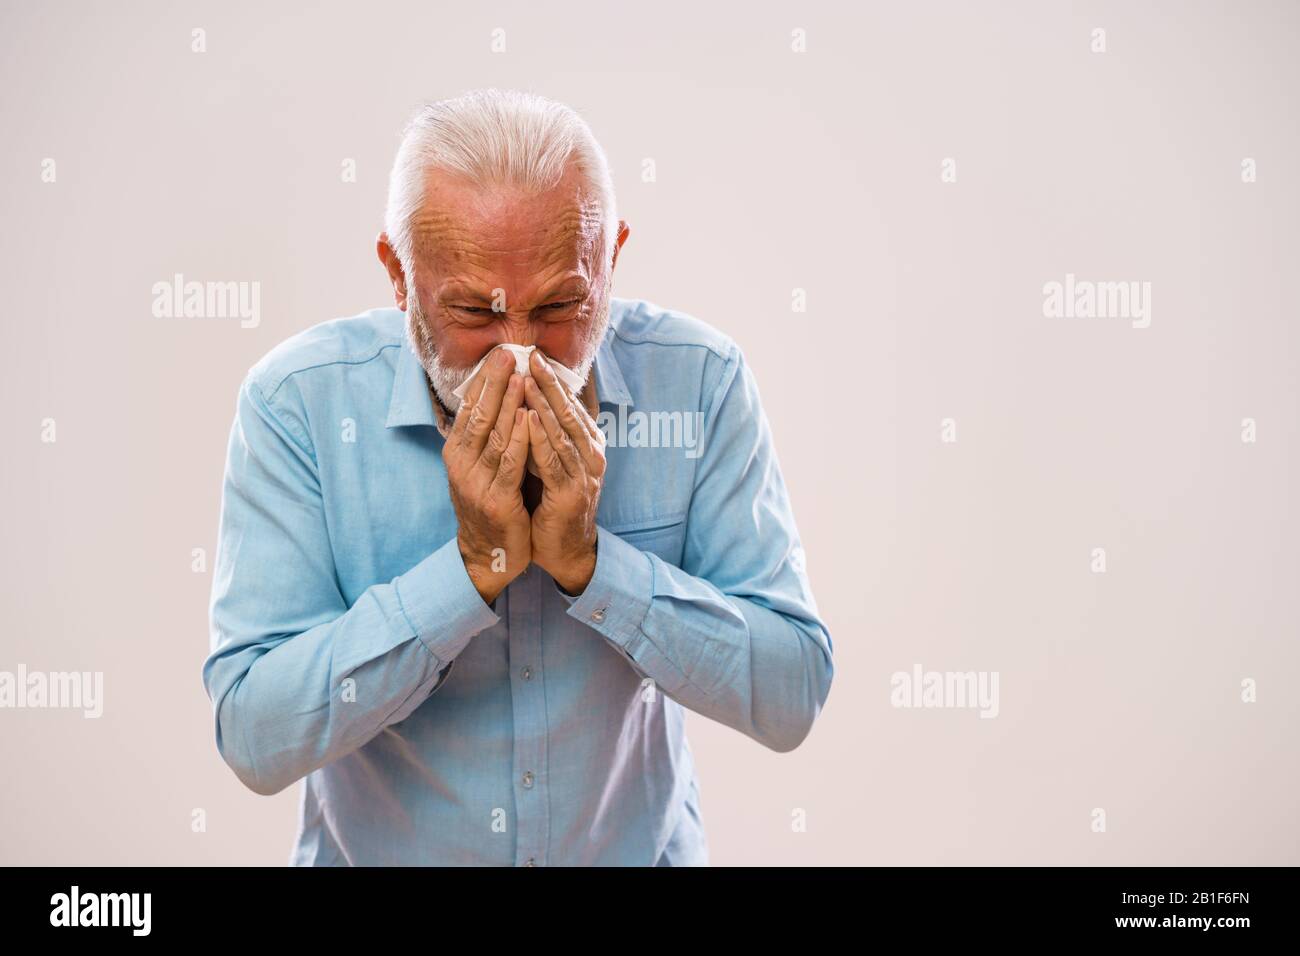 Portrait of senior man who is blowing nose. Stock Photo